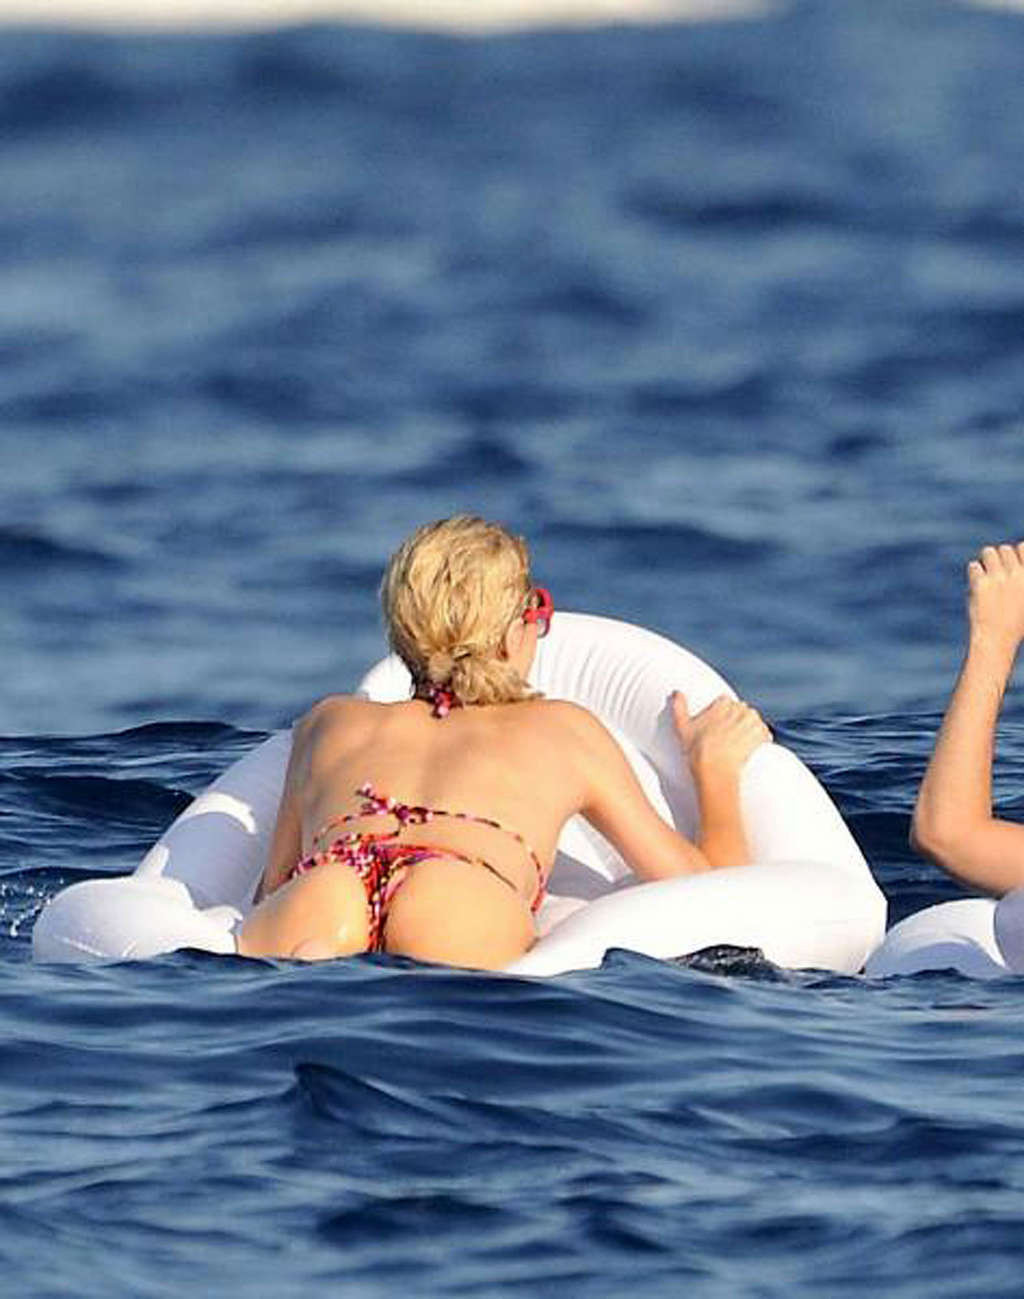 Paris Hilton enjoying on yacht in topless and showing sexy body #75340454